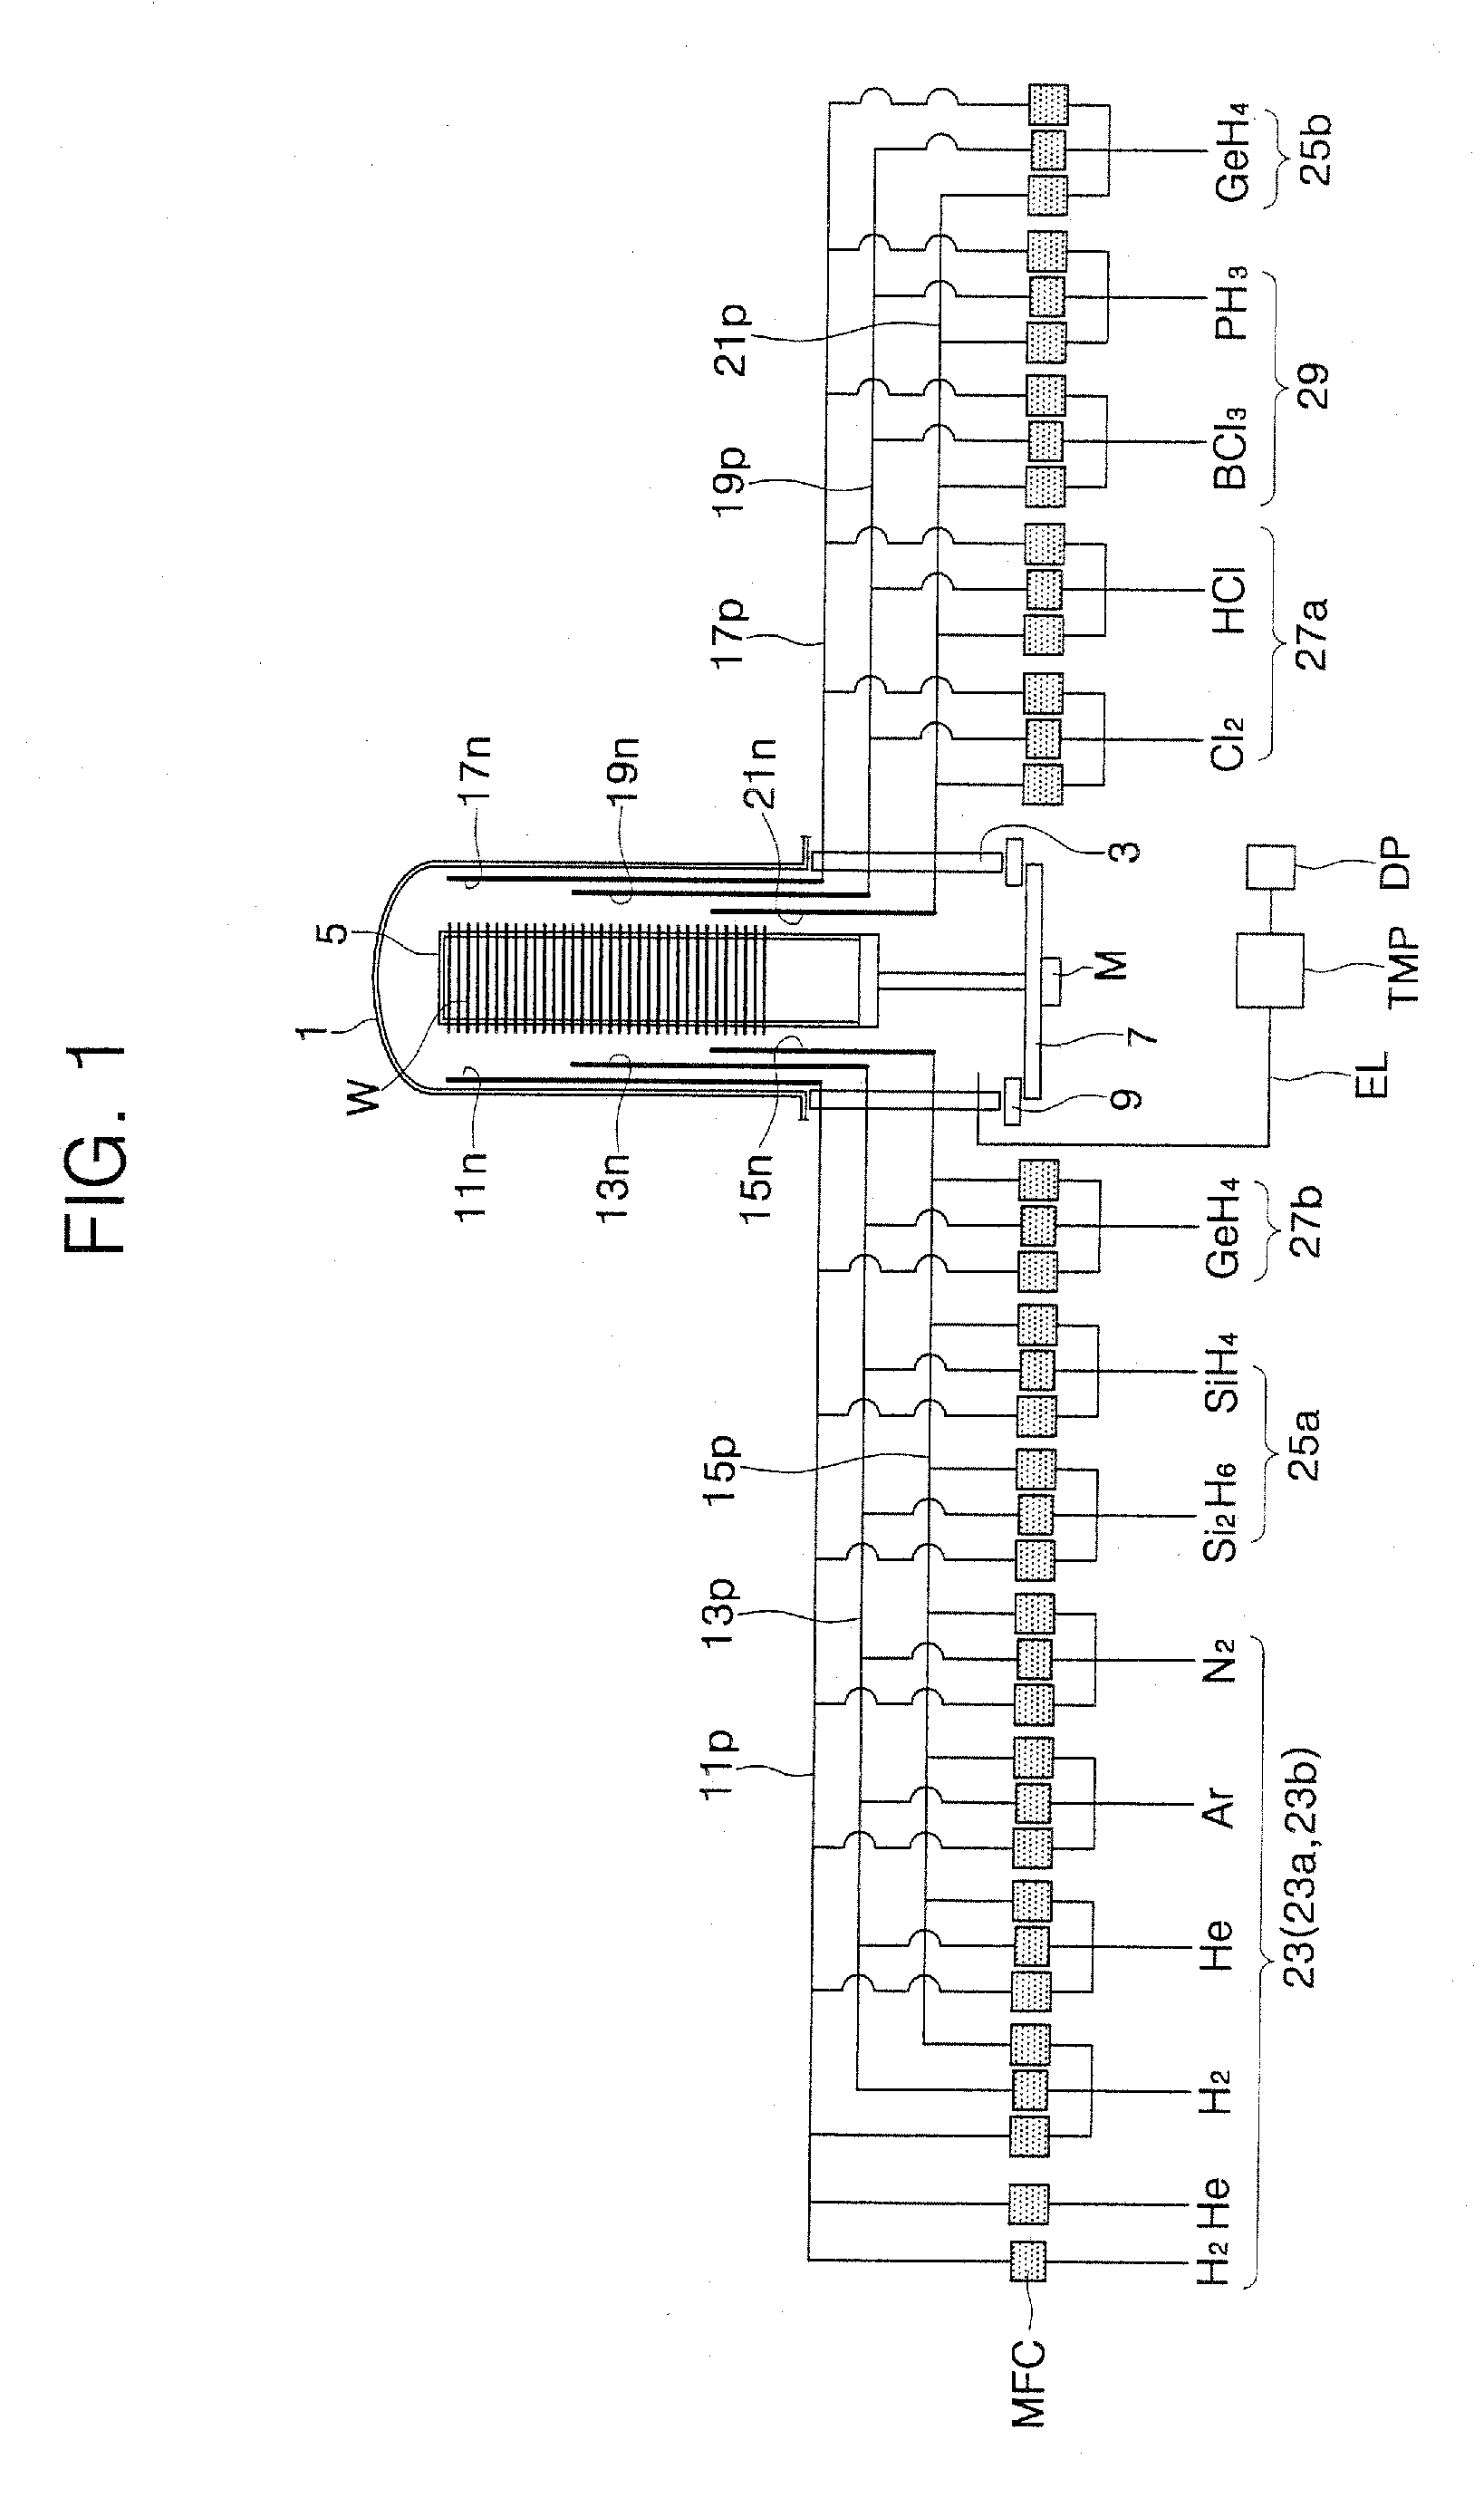 Methods of selectively forming an epitaxial semiconductor layer using ultra high vacuum chemical vapor deposition technique and batch-type ultra high vacuum chemical vapor deposition apparatus used therein